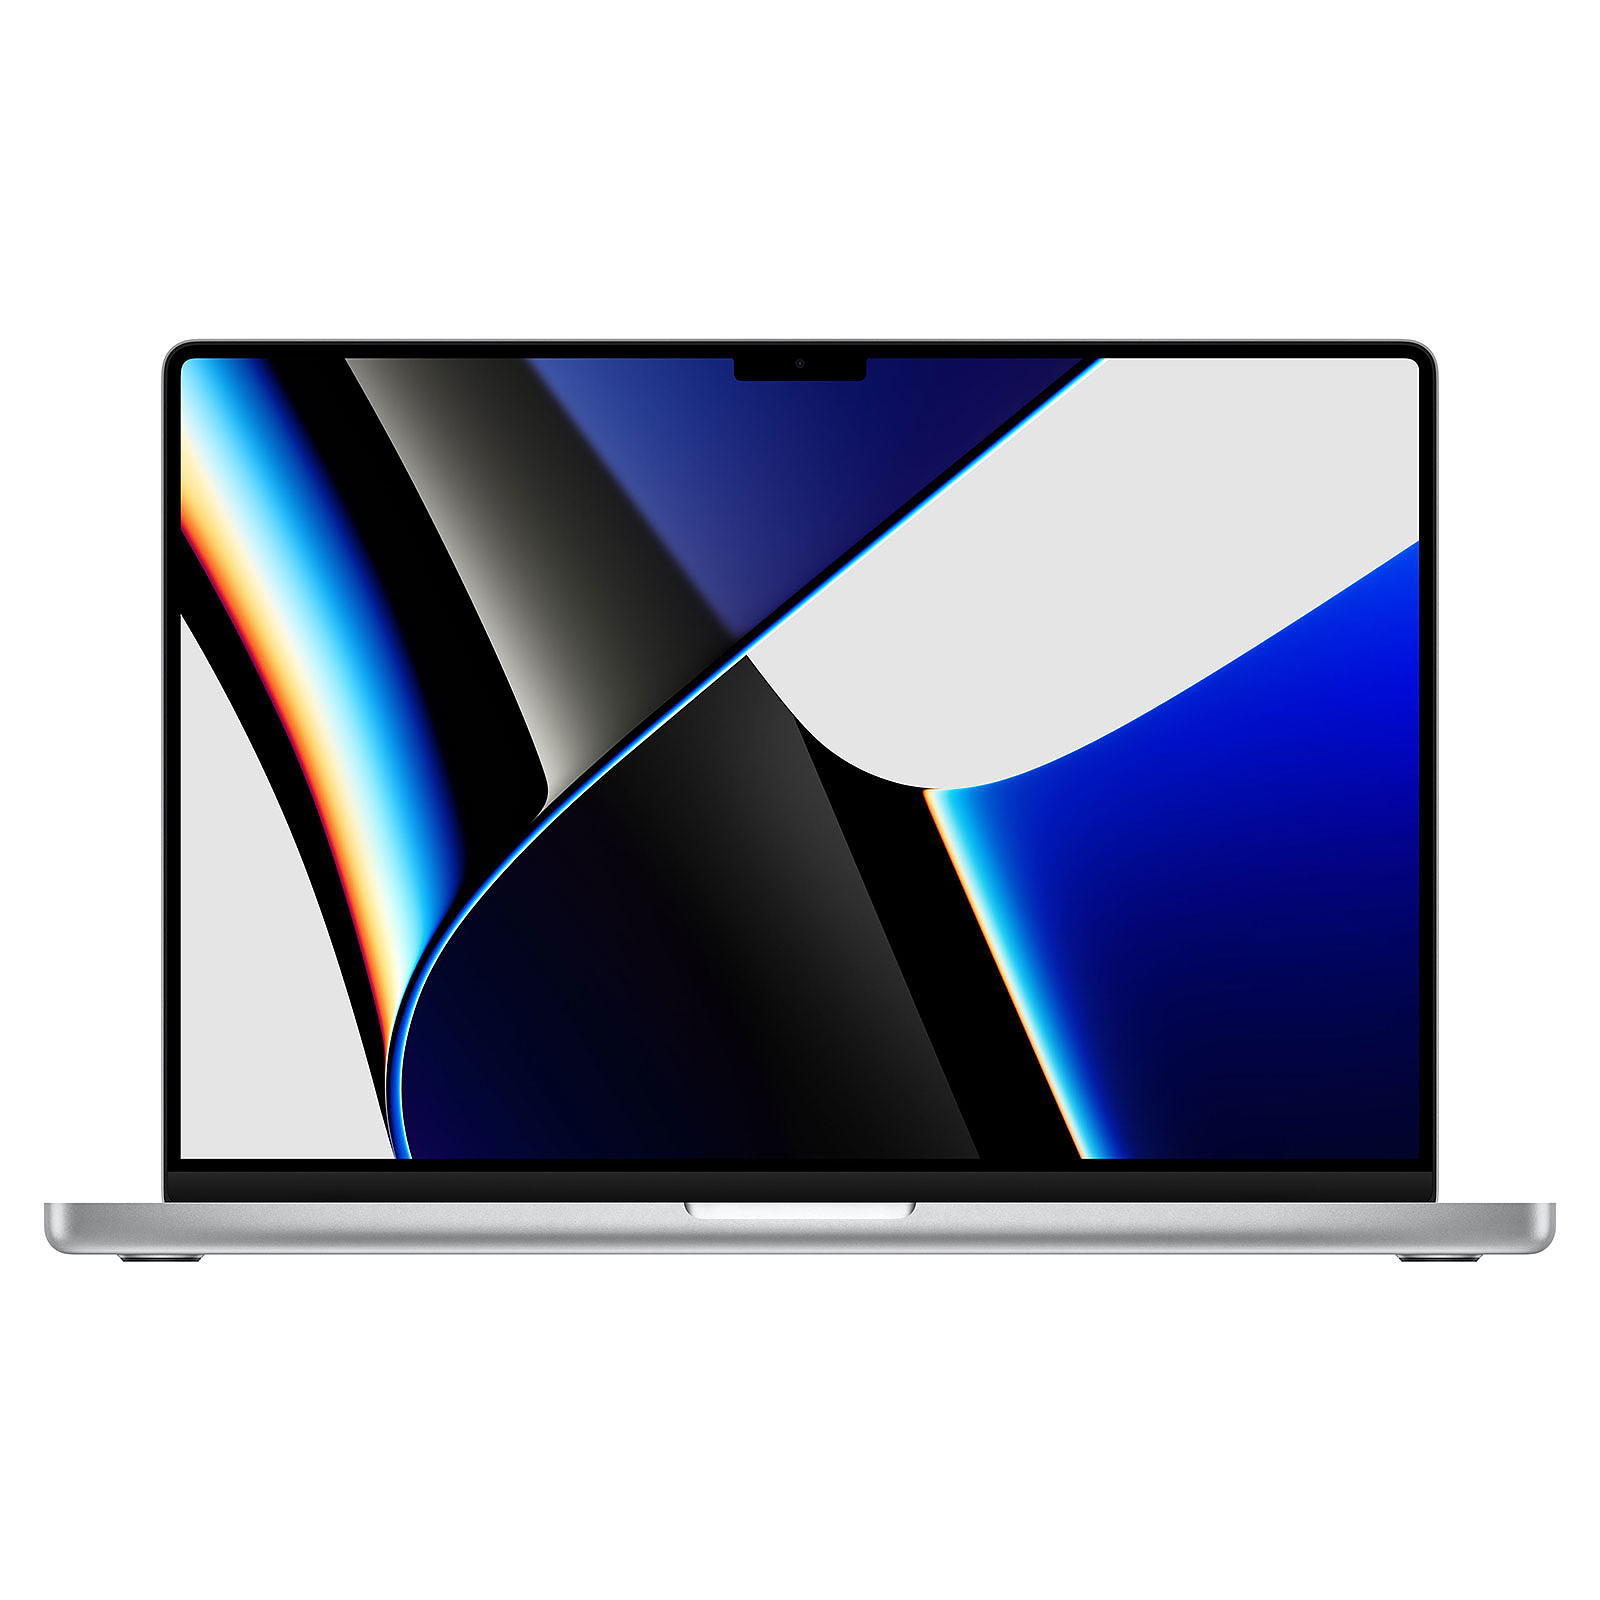 Apple MacBook Pro M1 Pro (2021) 16" Argent 16Go/1To (MK1F3FN/A) · Occasion - MacBook Apple - Occasion